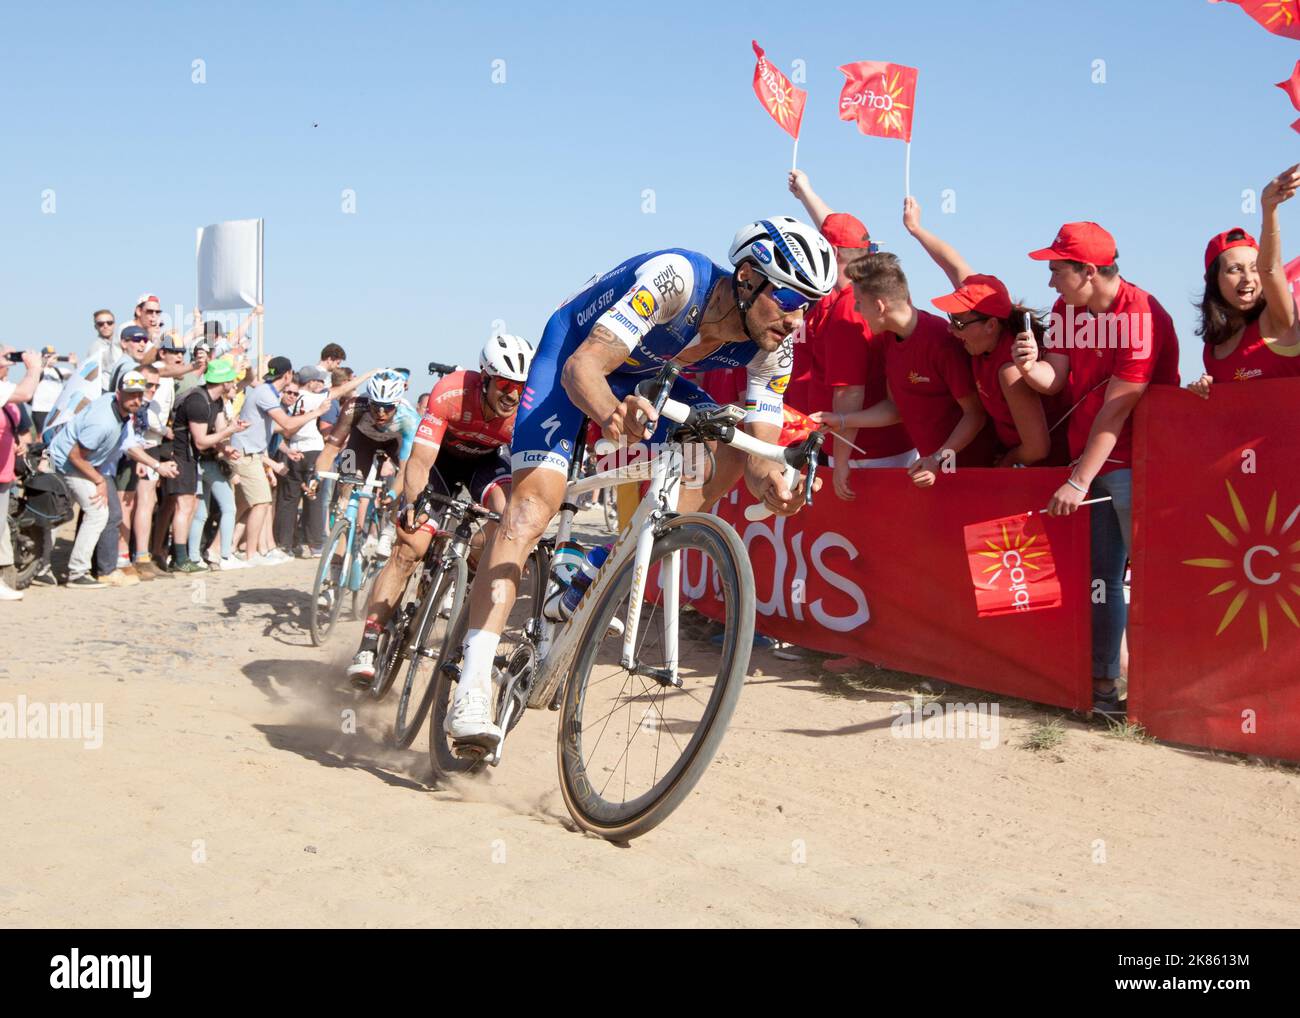 Tom boonen, (Quick-step Floors) chasing hard Carrefour de l'Arbre to bring himself back to the leaders Stock Photo